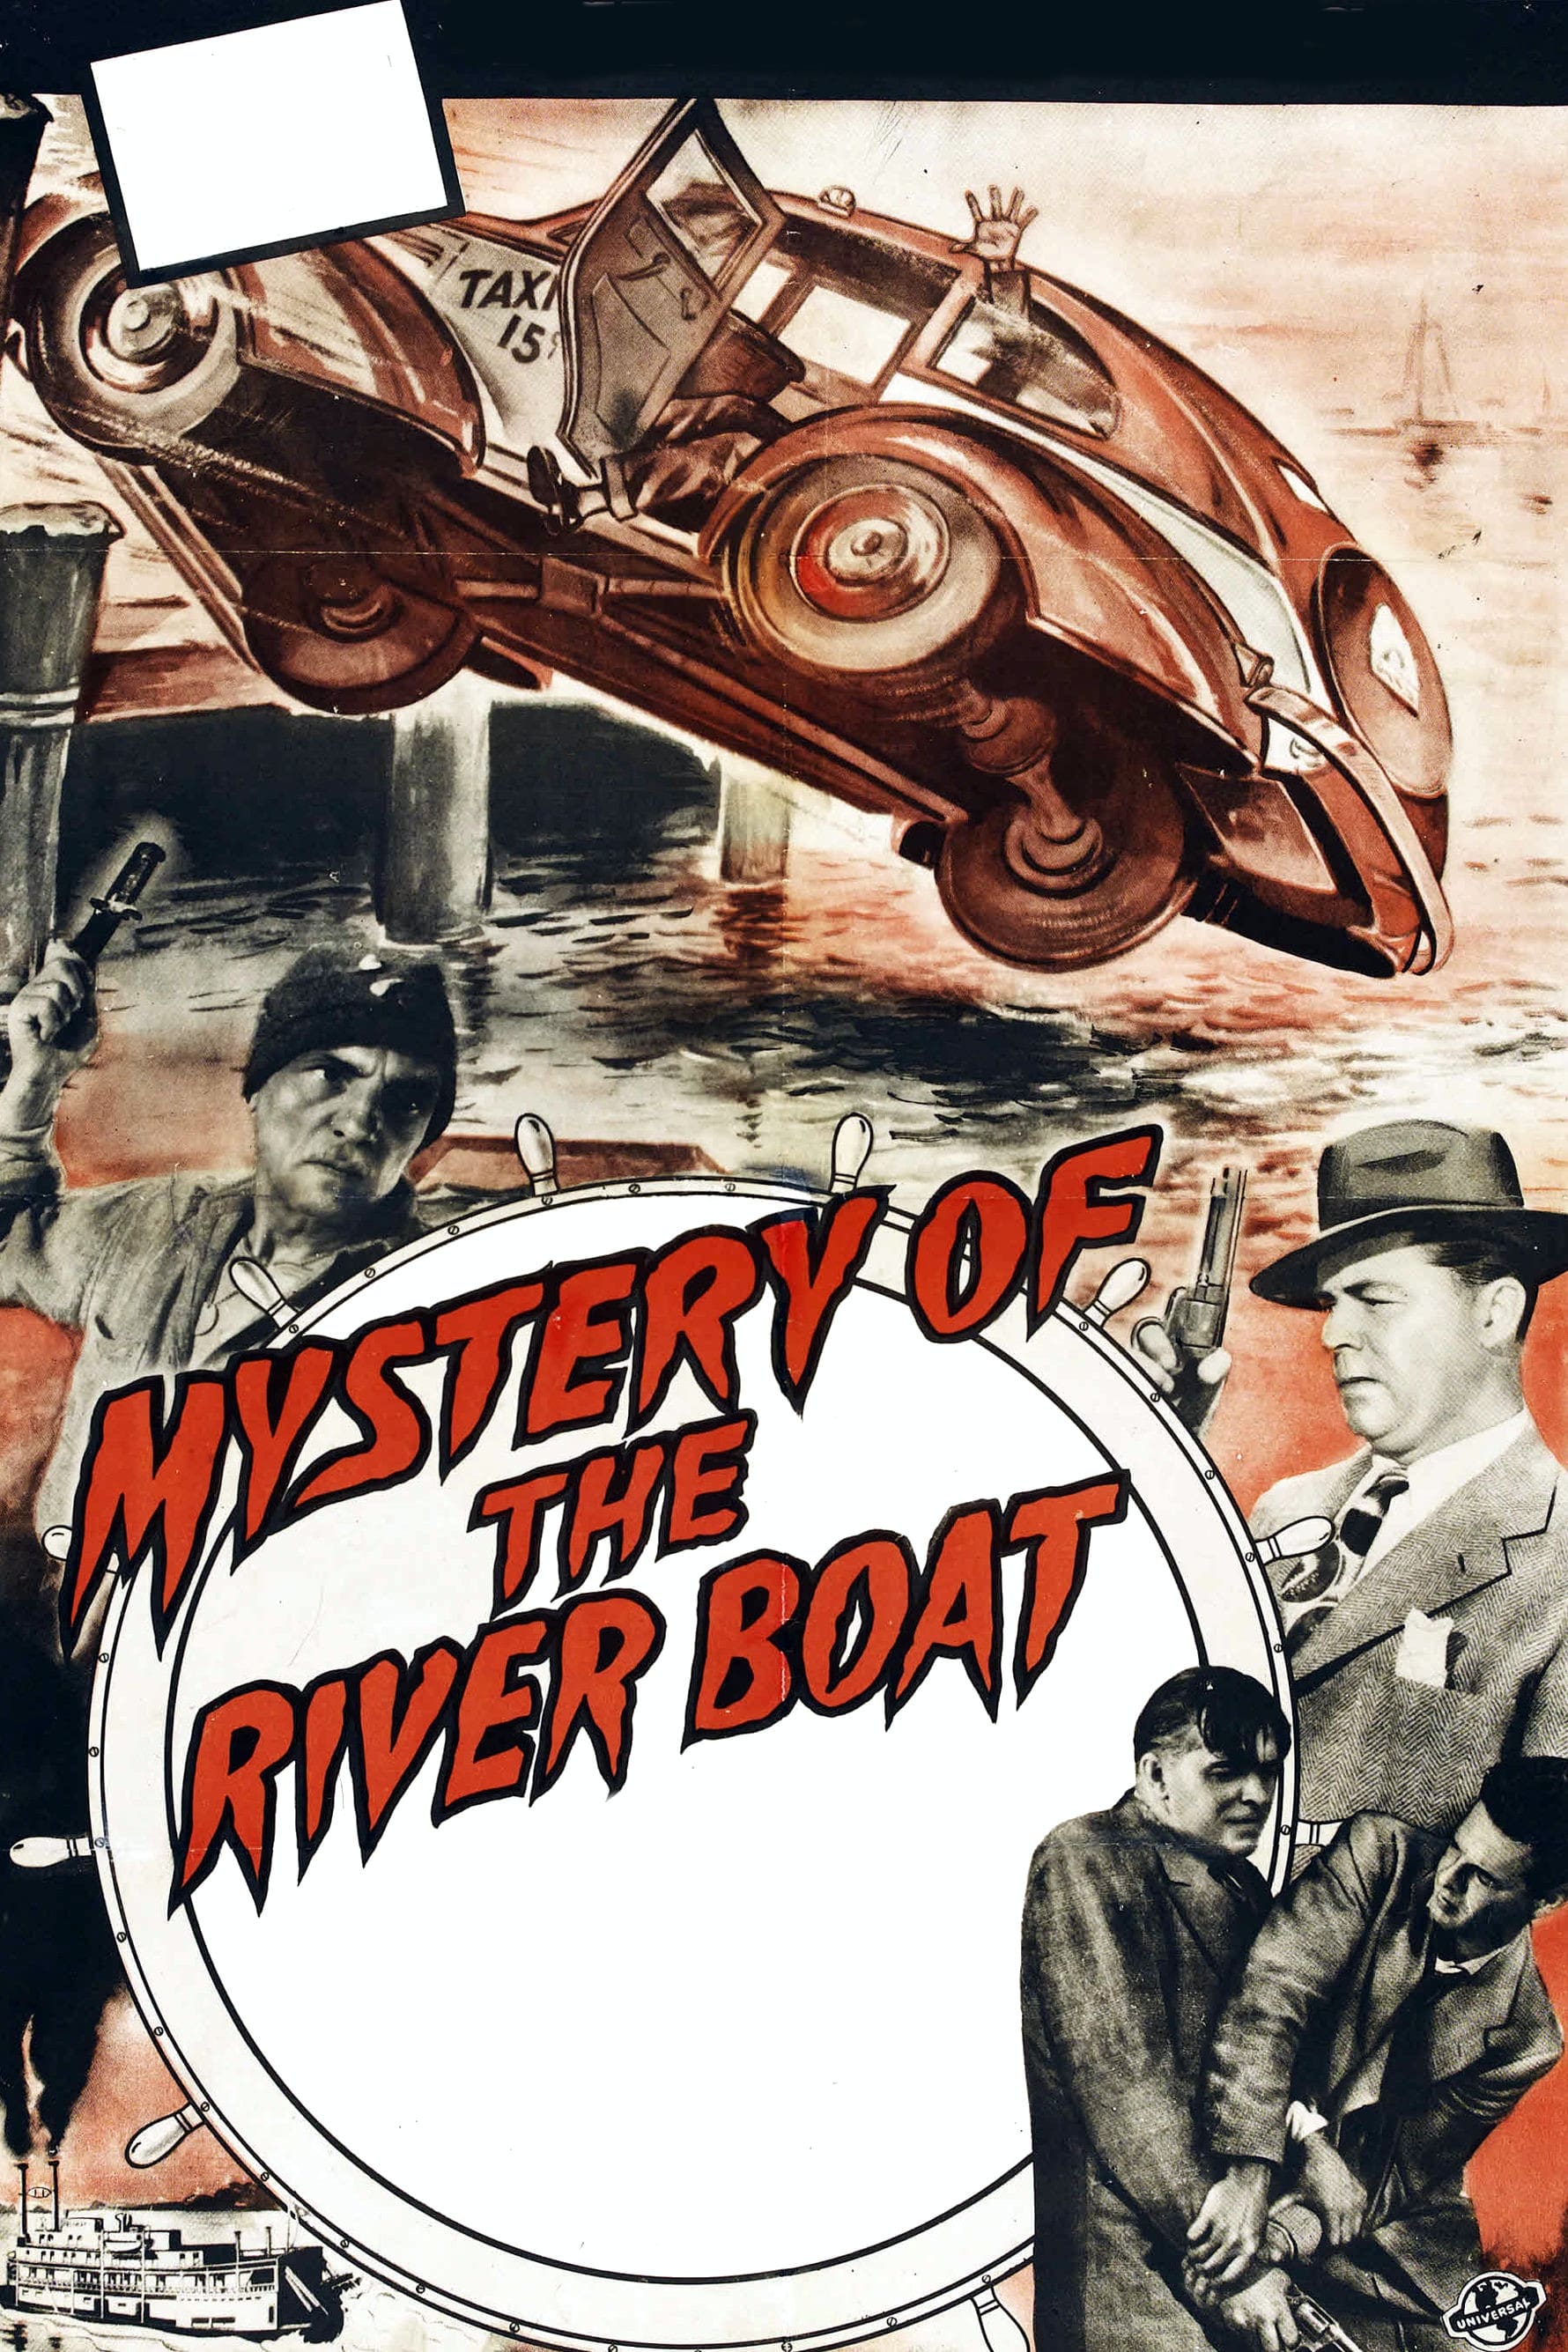 The Mystery of the Riverboat (1944)